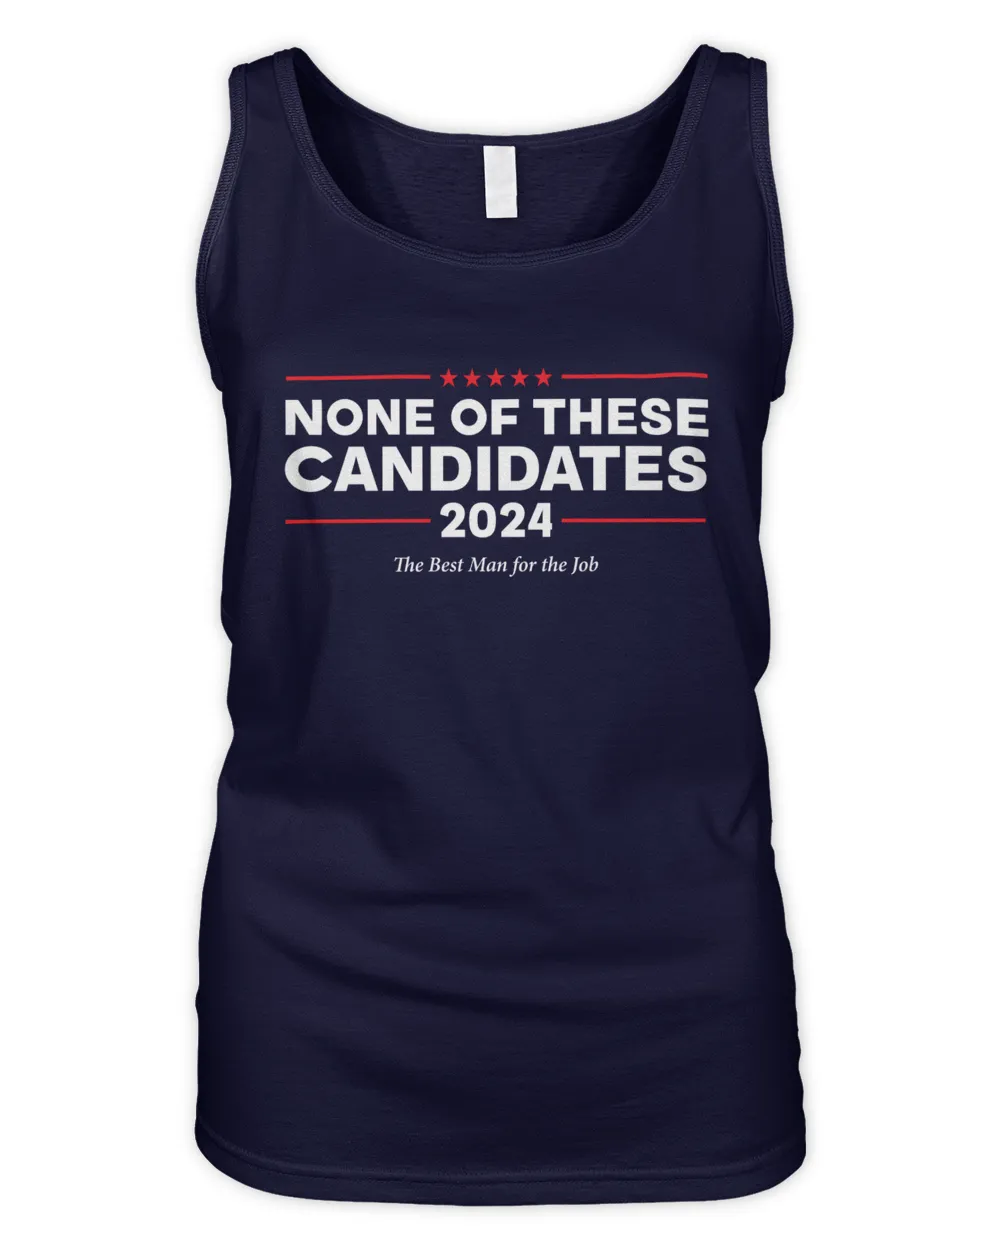 None of These Candidates 2024 T-shirt